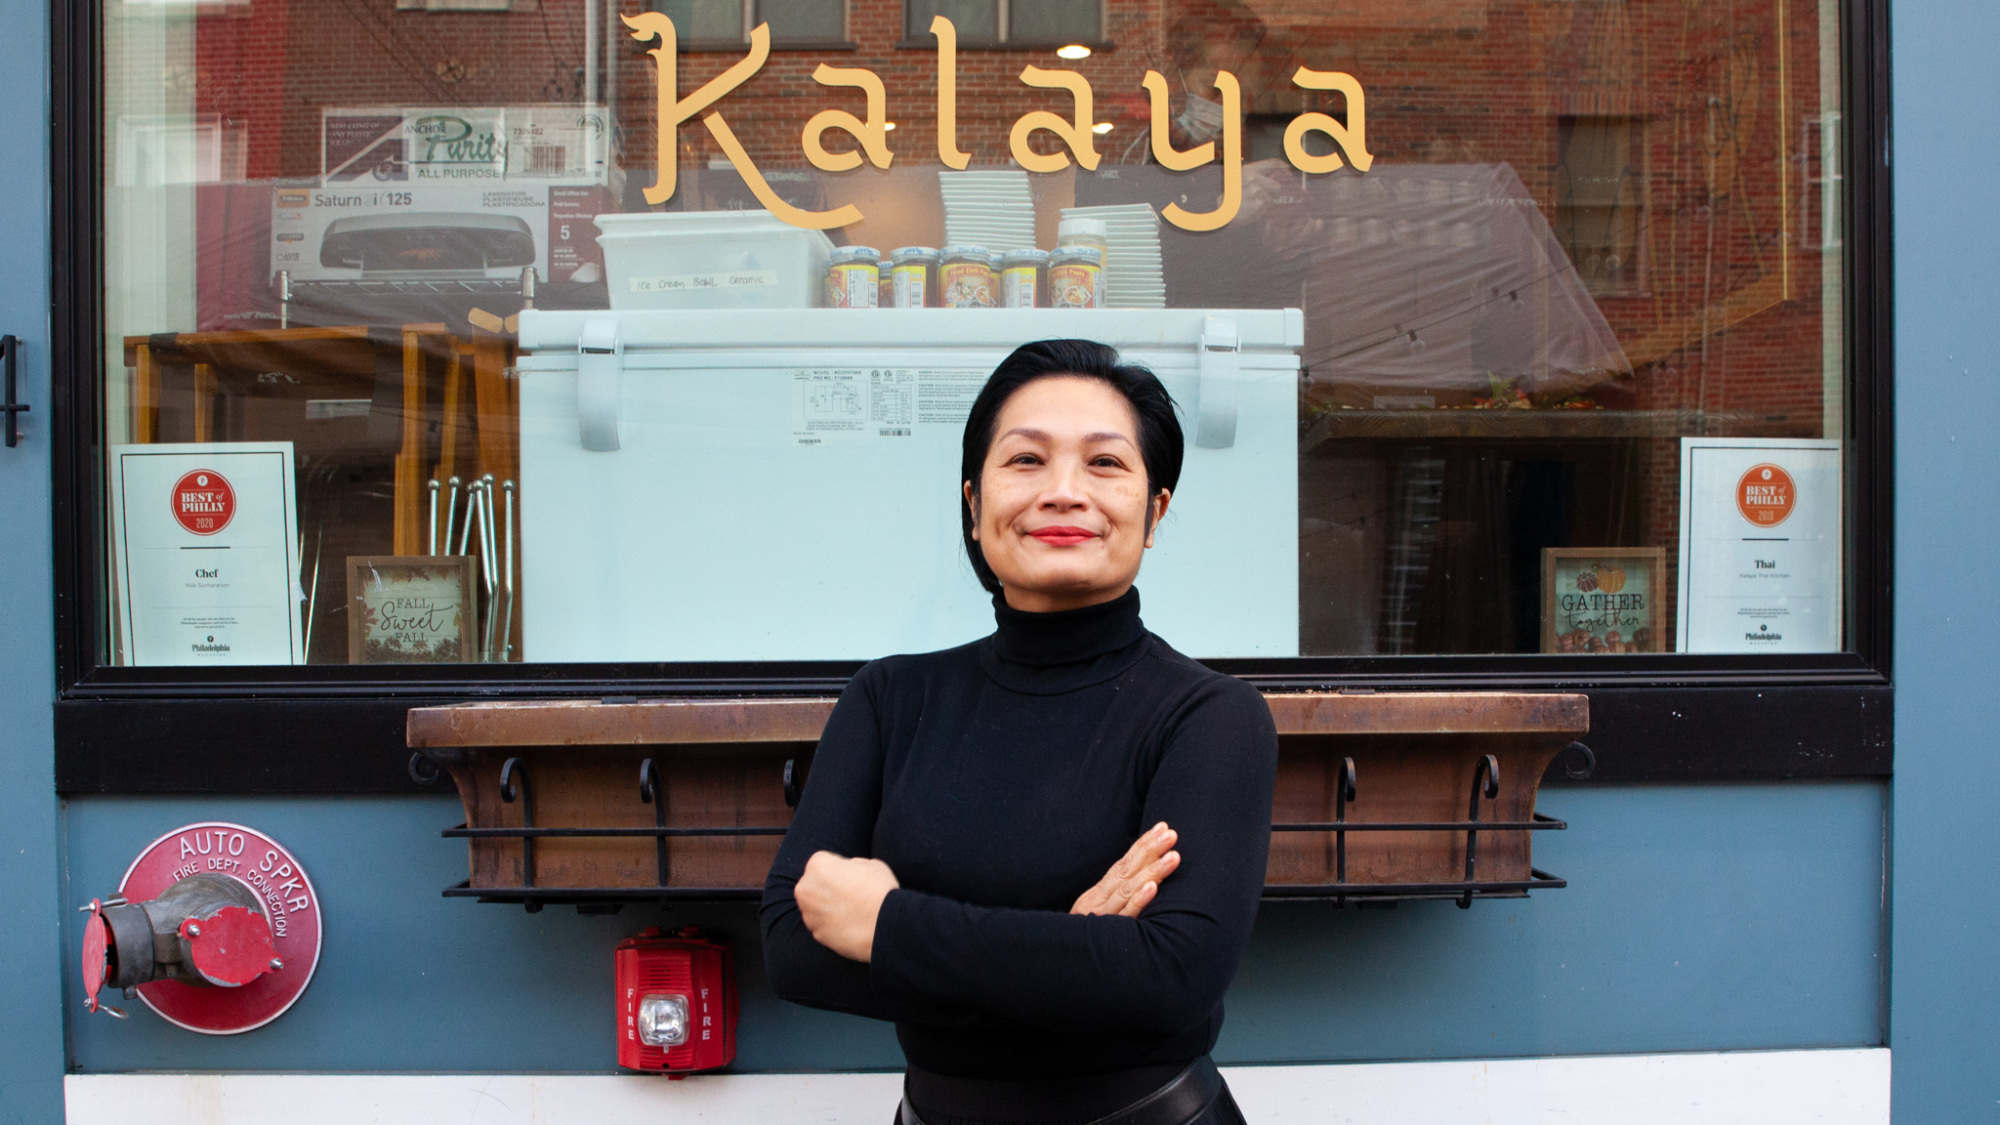 "Kalaya is about culture. It’s about authenticity. It’s about you coming to learn my cuisine." // Photo by Kae Lani Palmisano